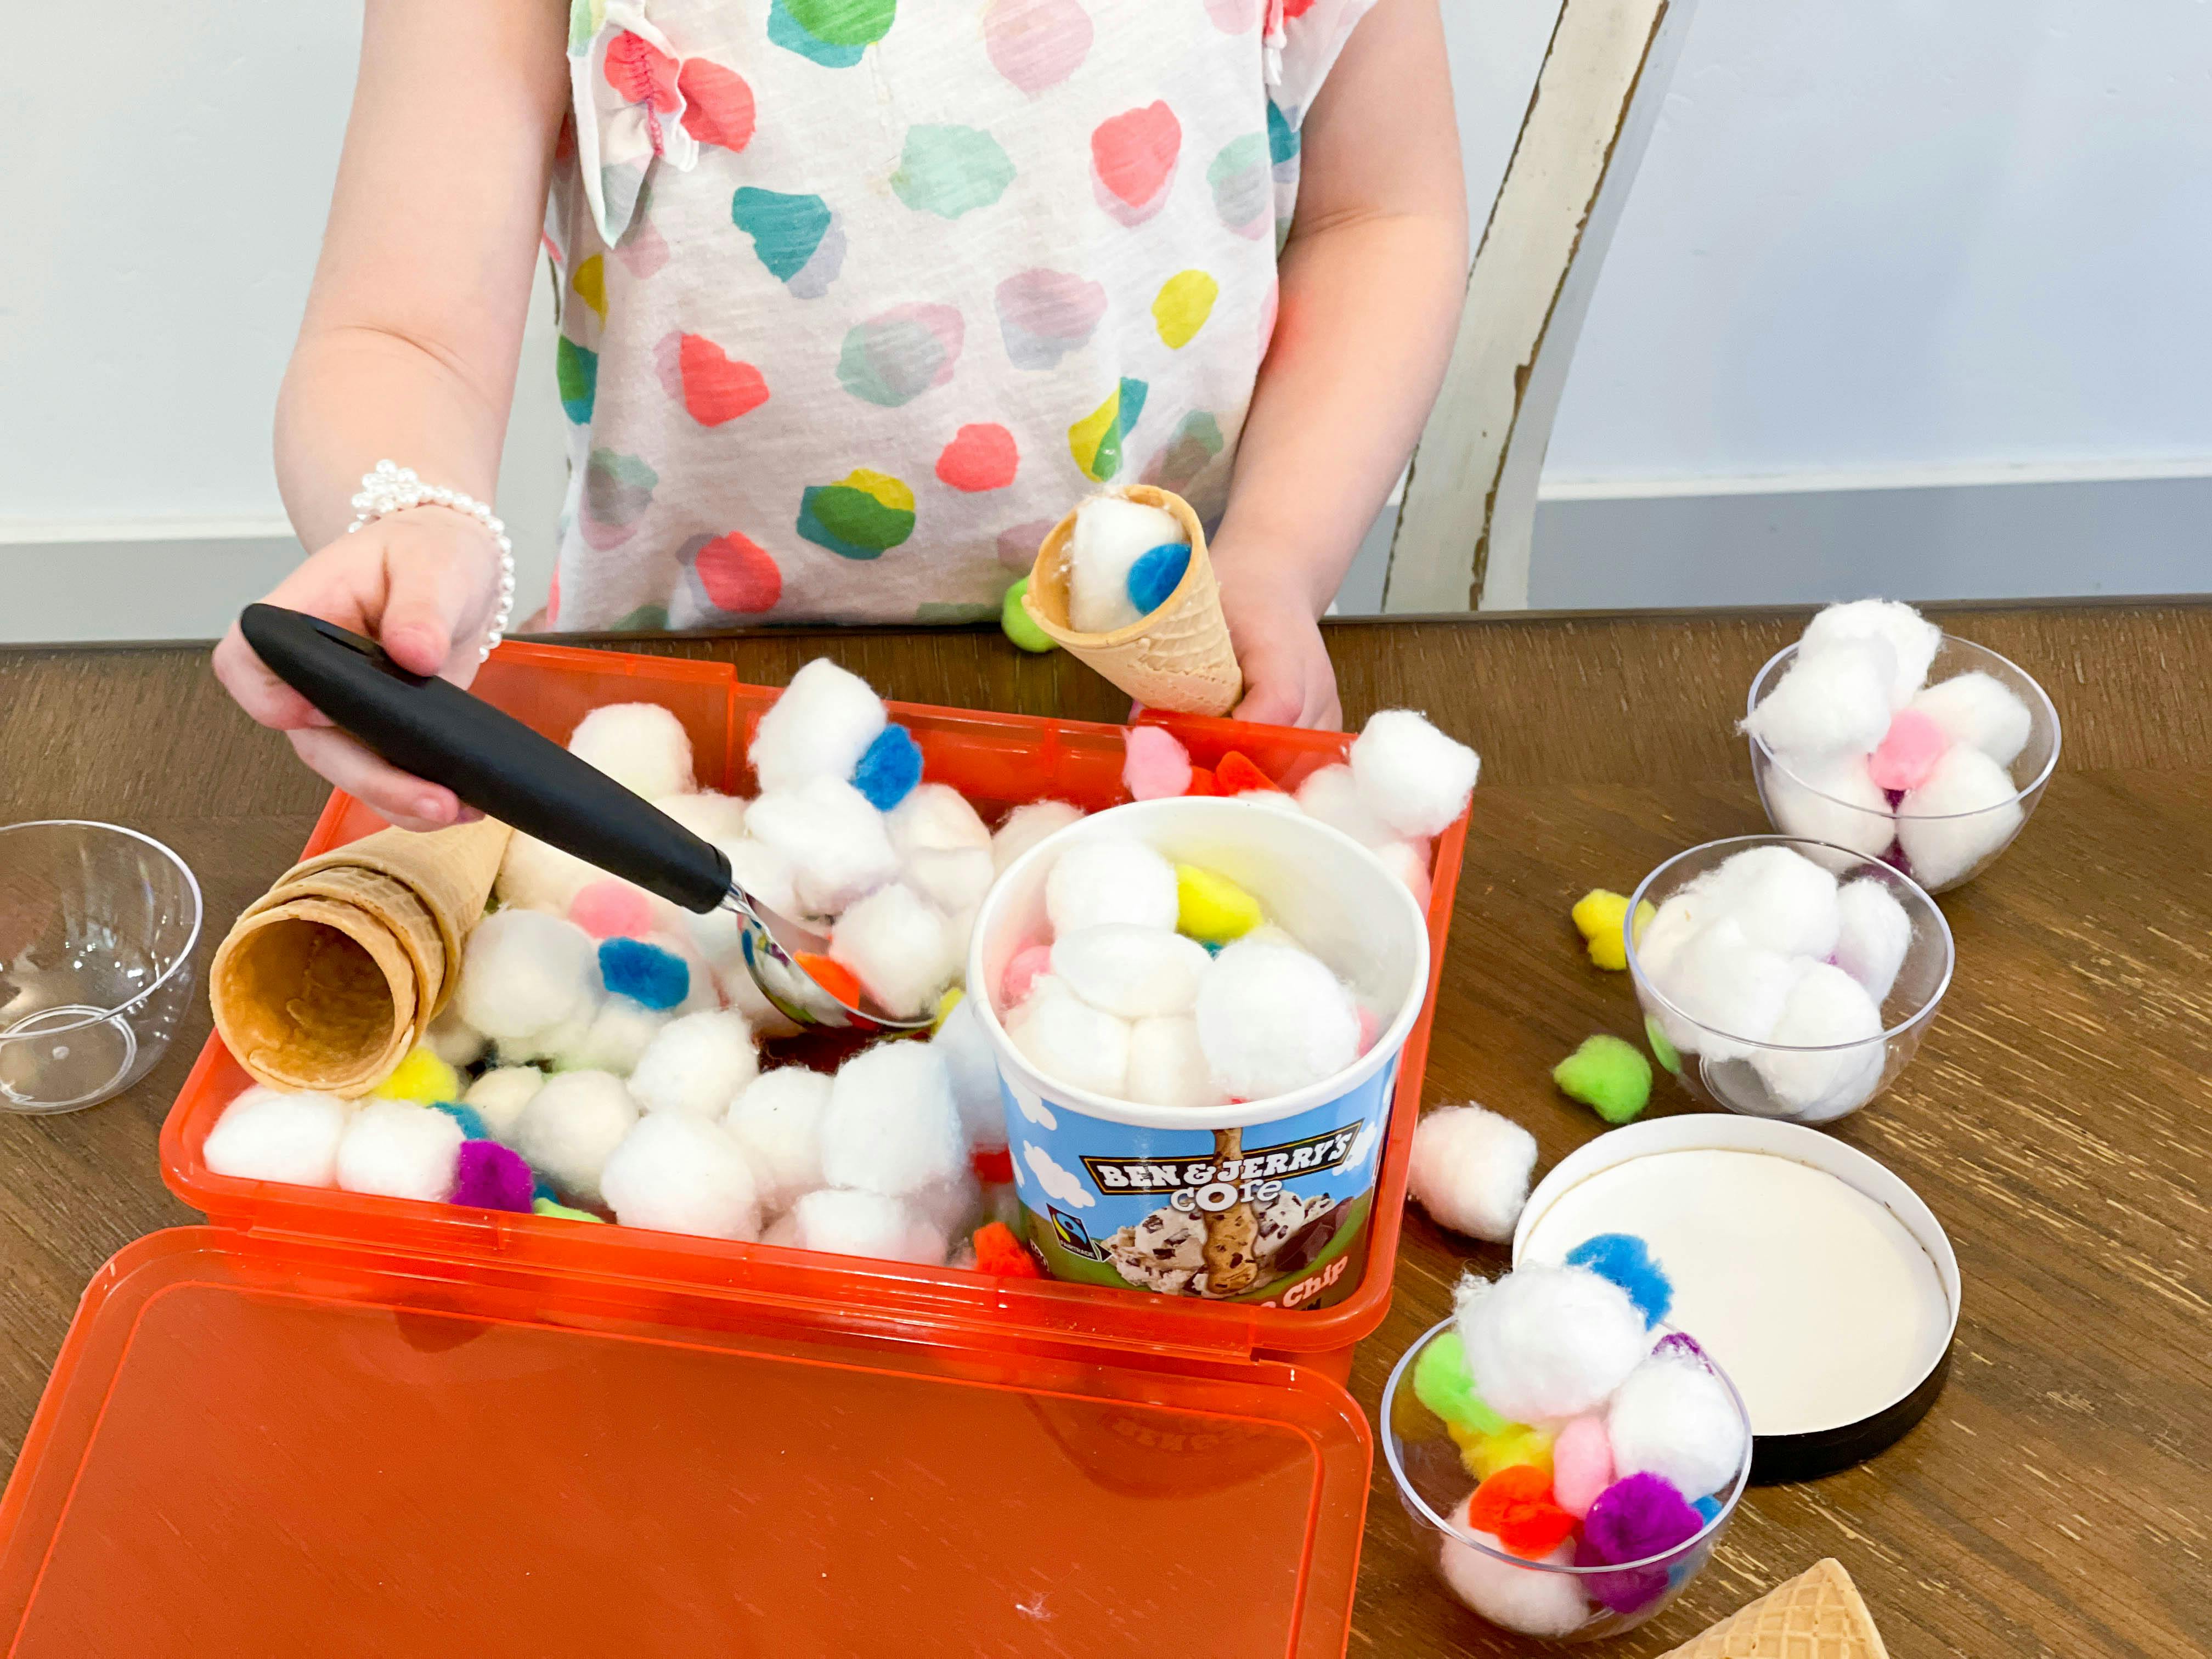 Find the Best Sensory Play Items at the Dollar Store